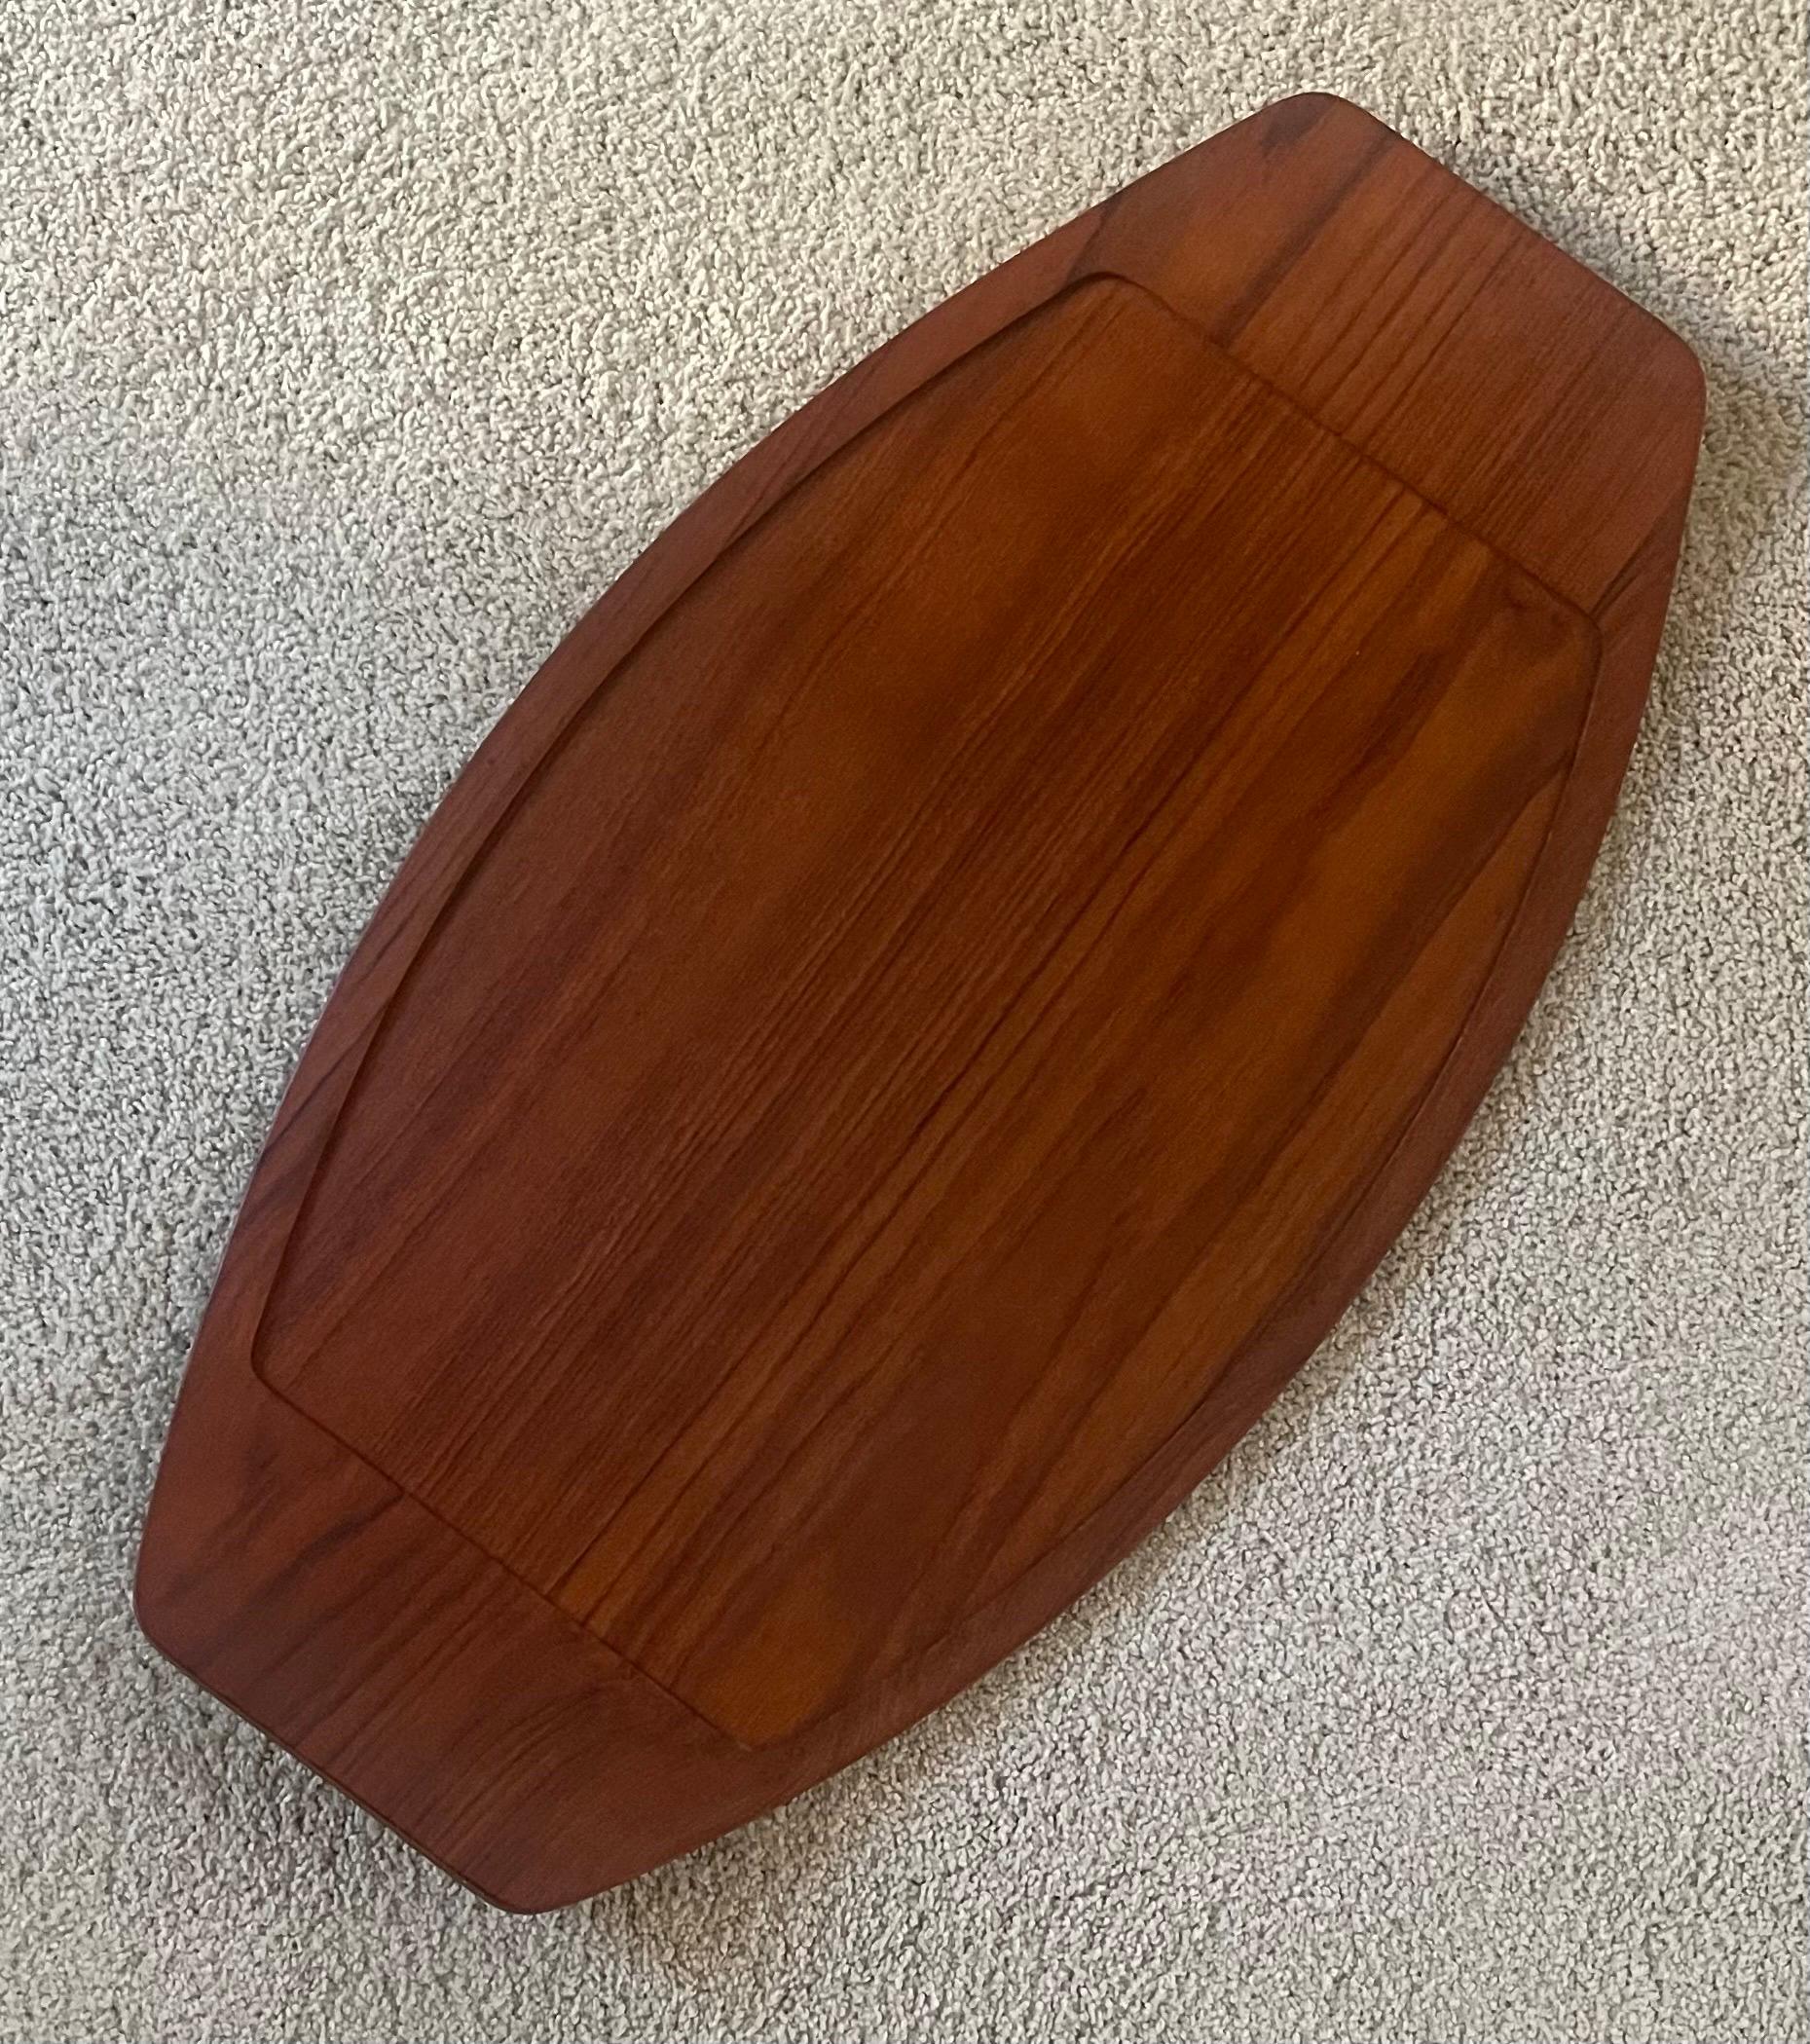 Large Solid Teak Surfboard Tray with Raised Edge by Digsmed - Rare In Good Condition For Sale In San Diego, CA